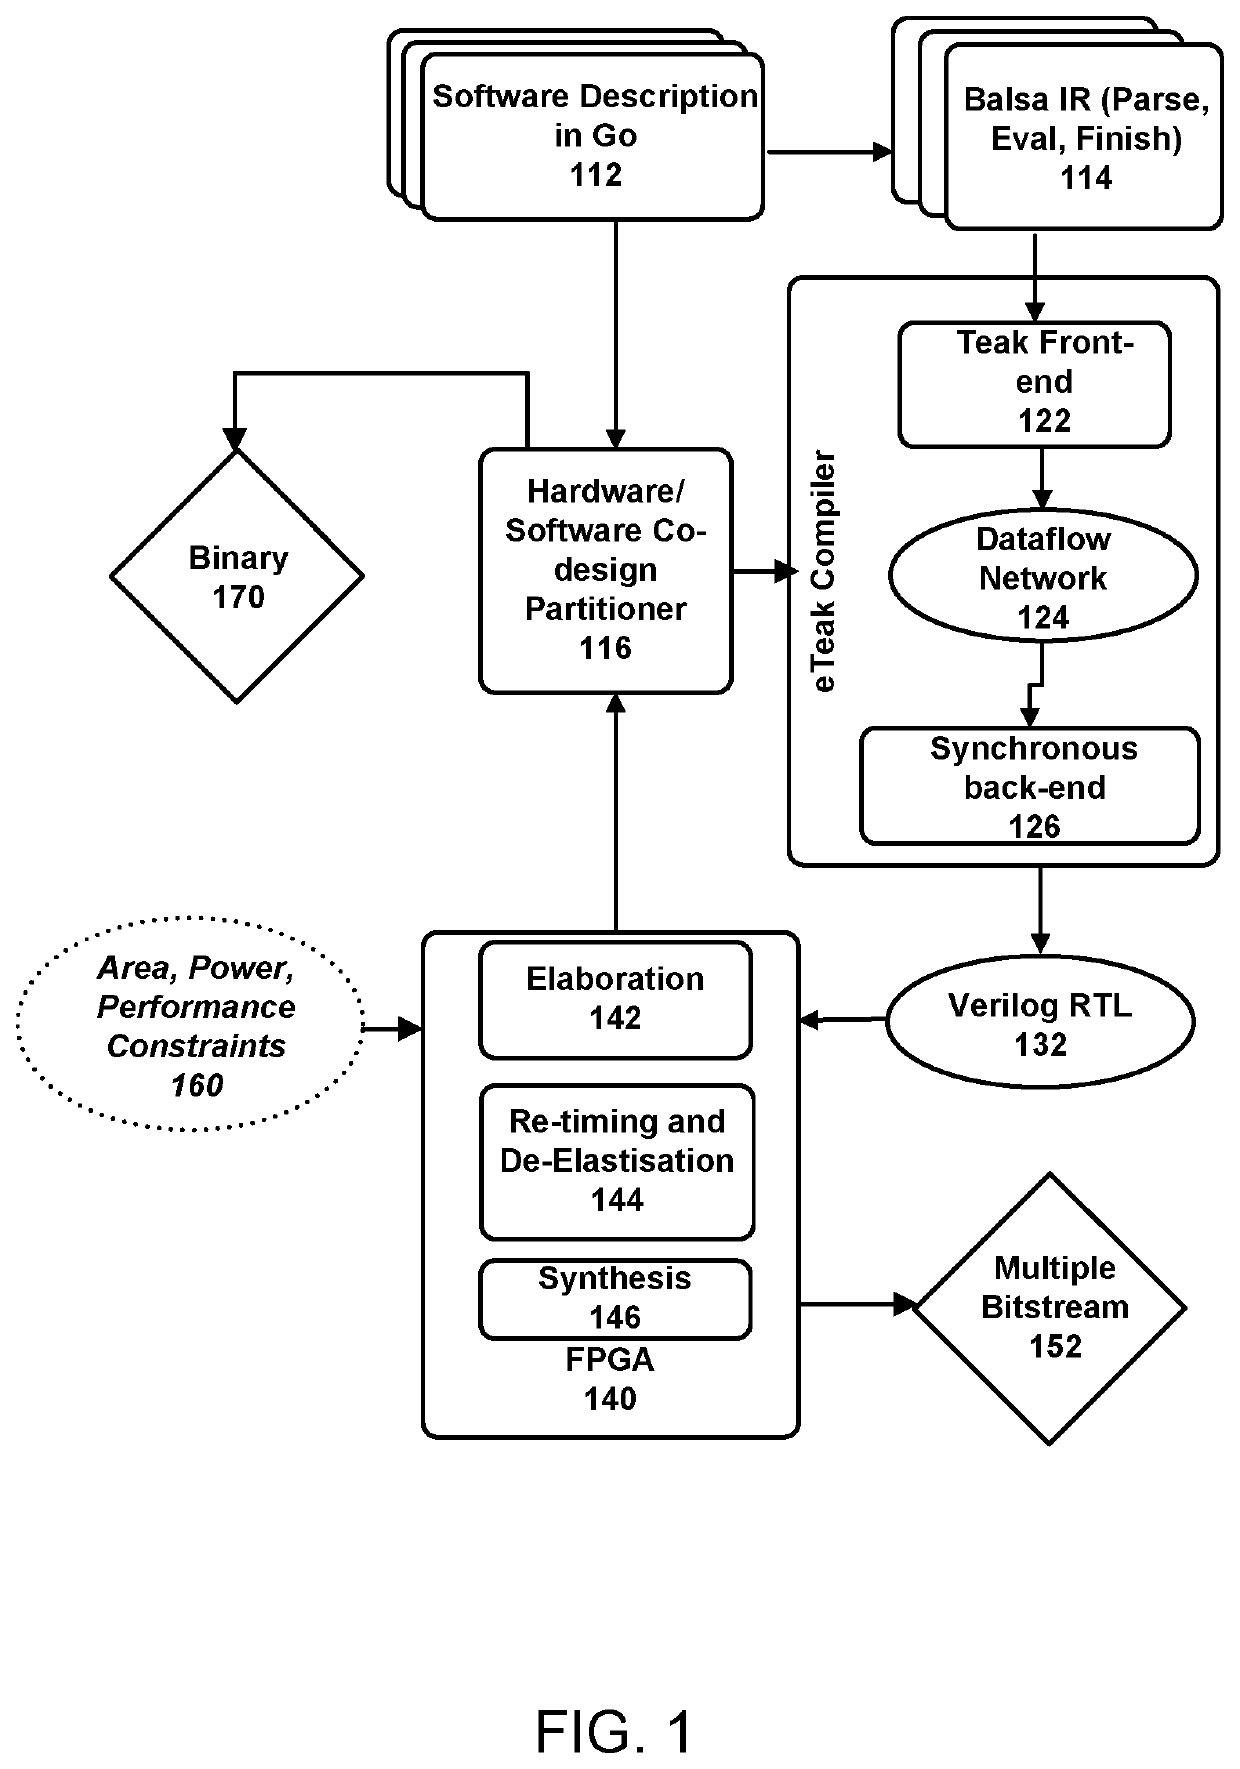 Synthesis path for transforming concurrent programs into hardware deployable on FPGA-based cloud infrastructures